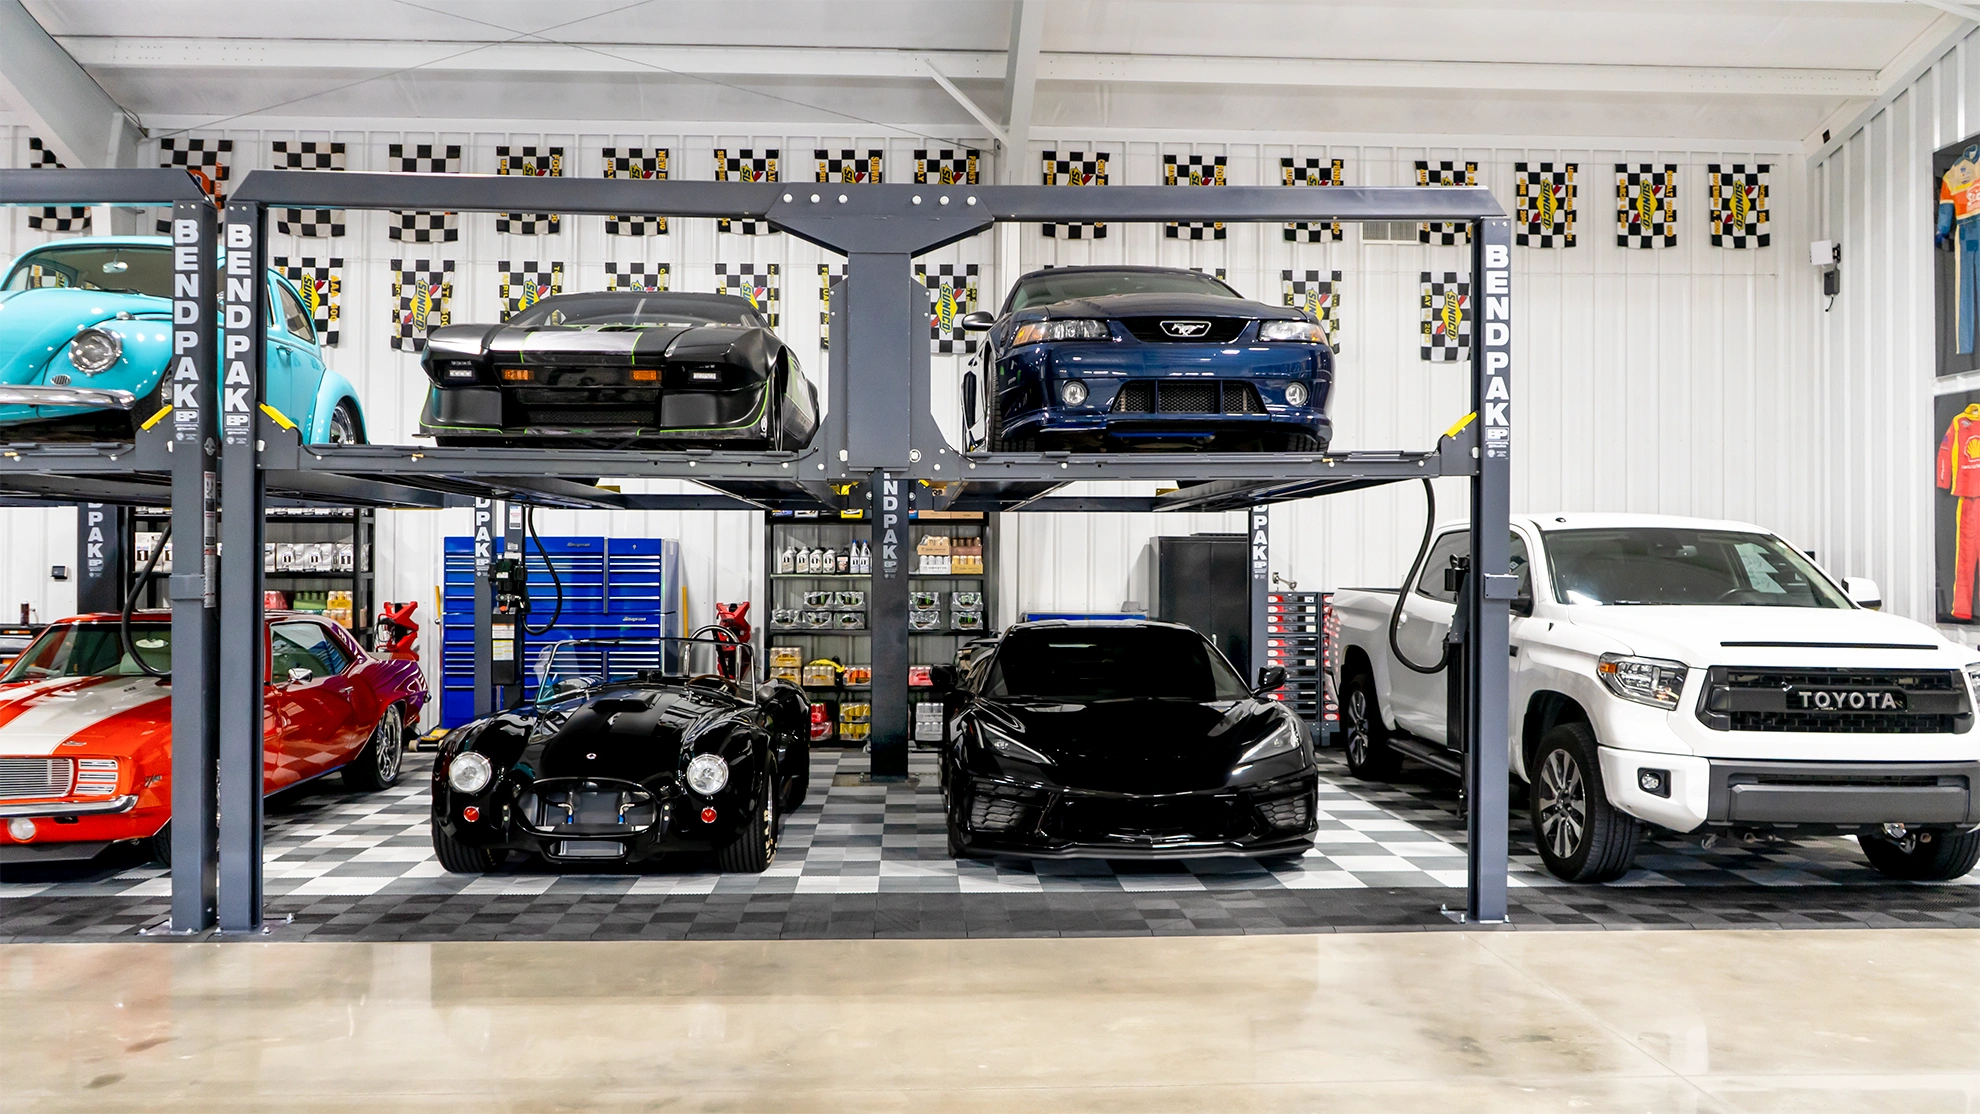 The Ultimate Dream Garage Is This Street Built Inside A Warehouse